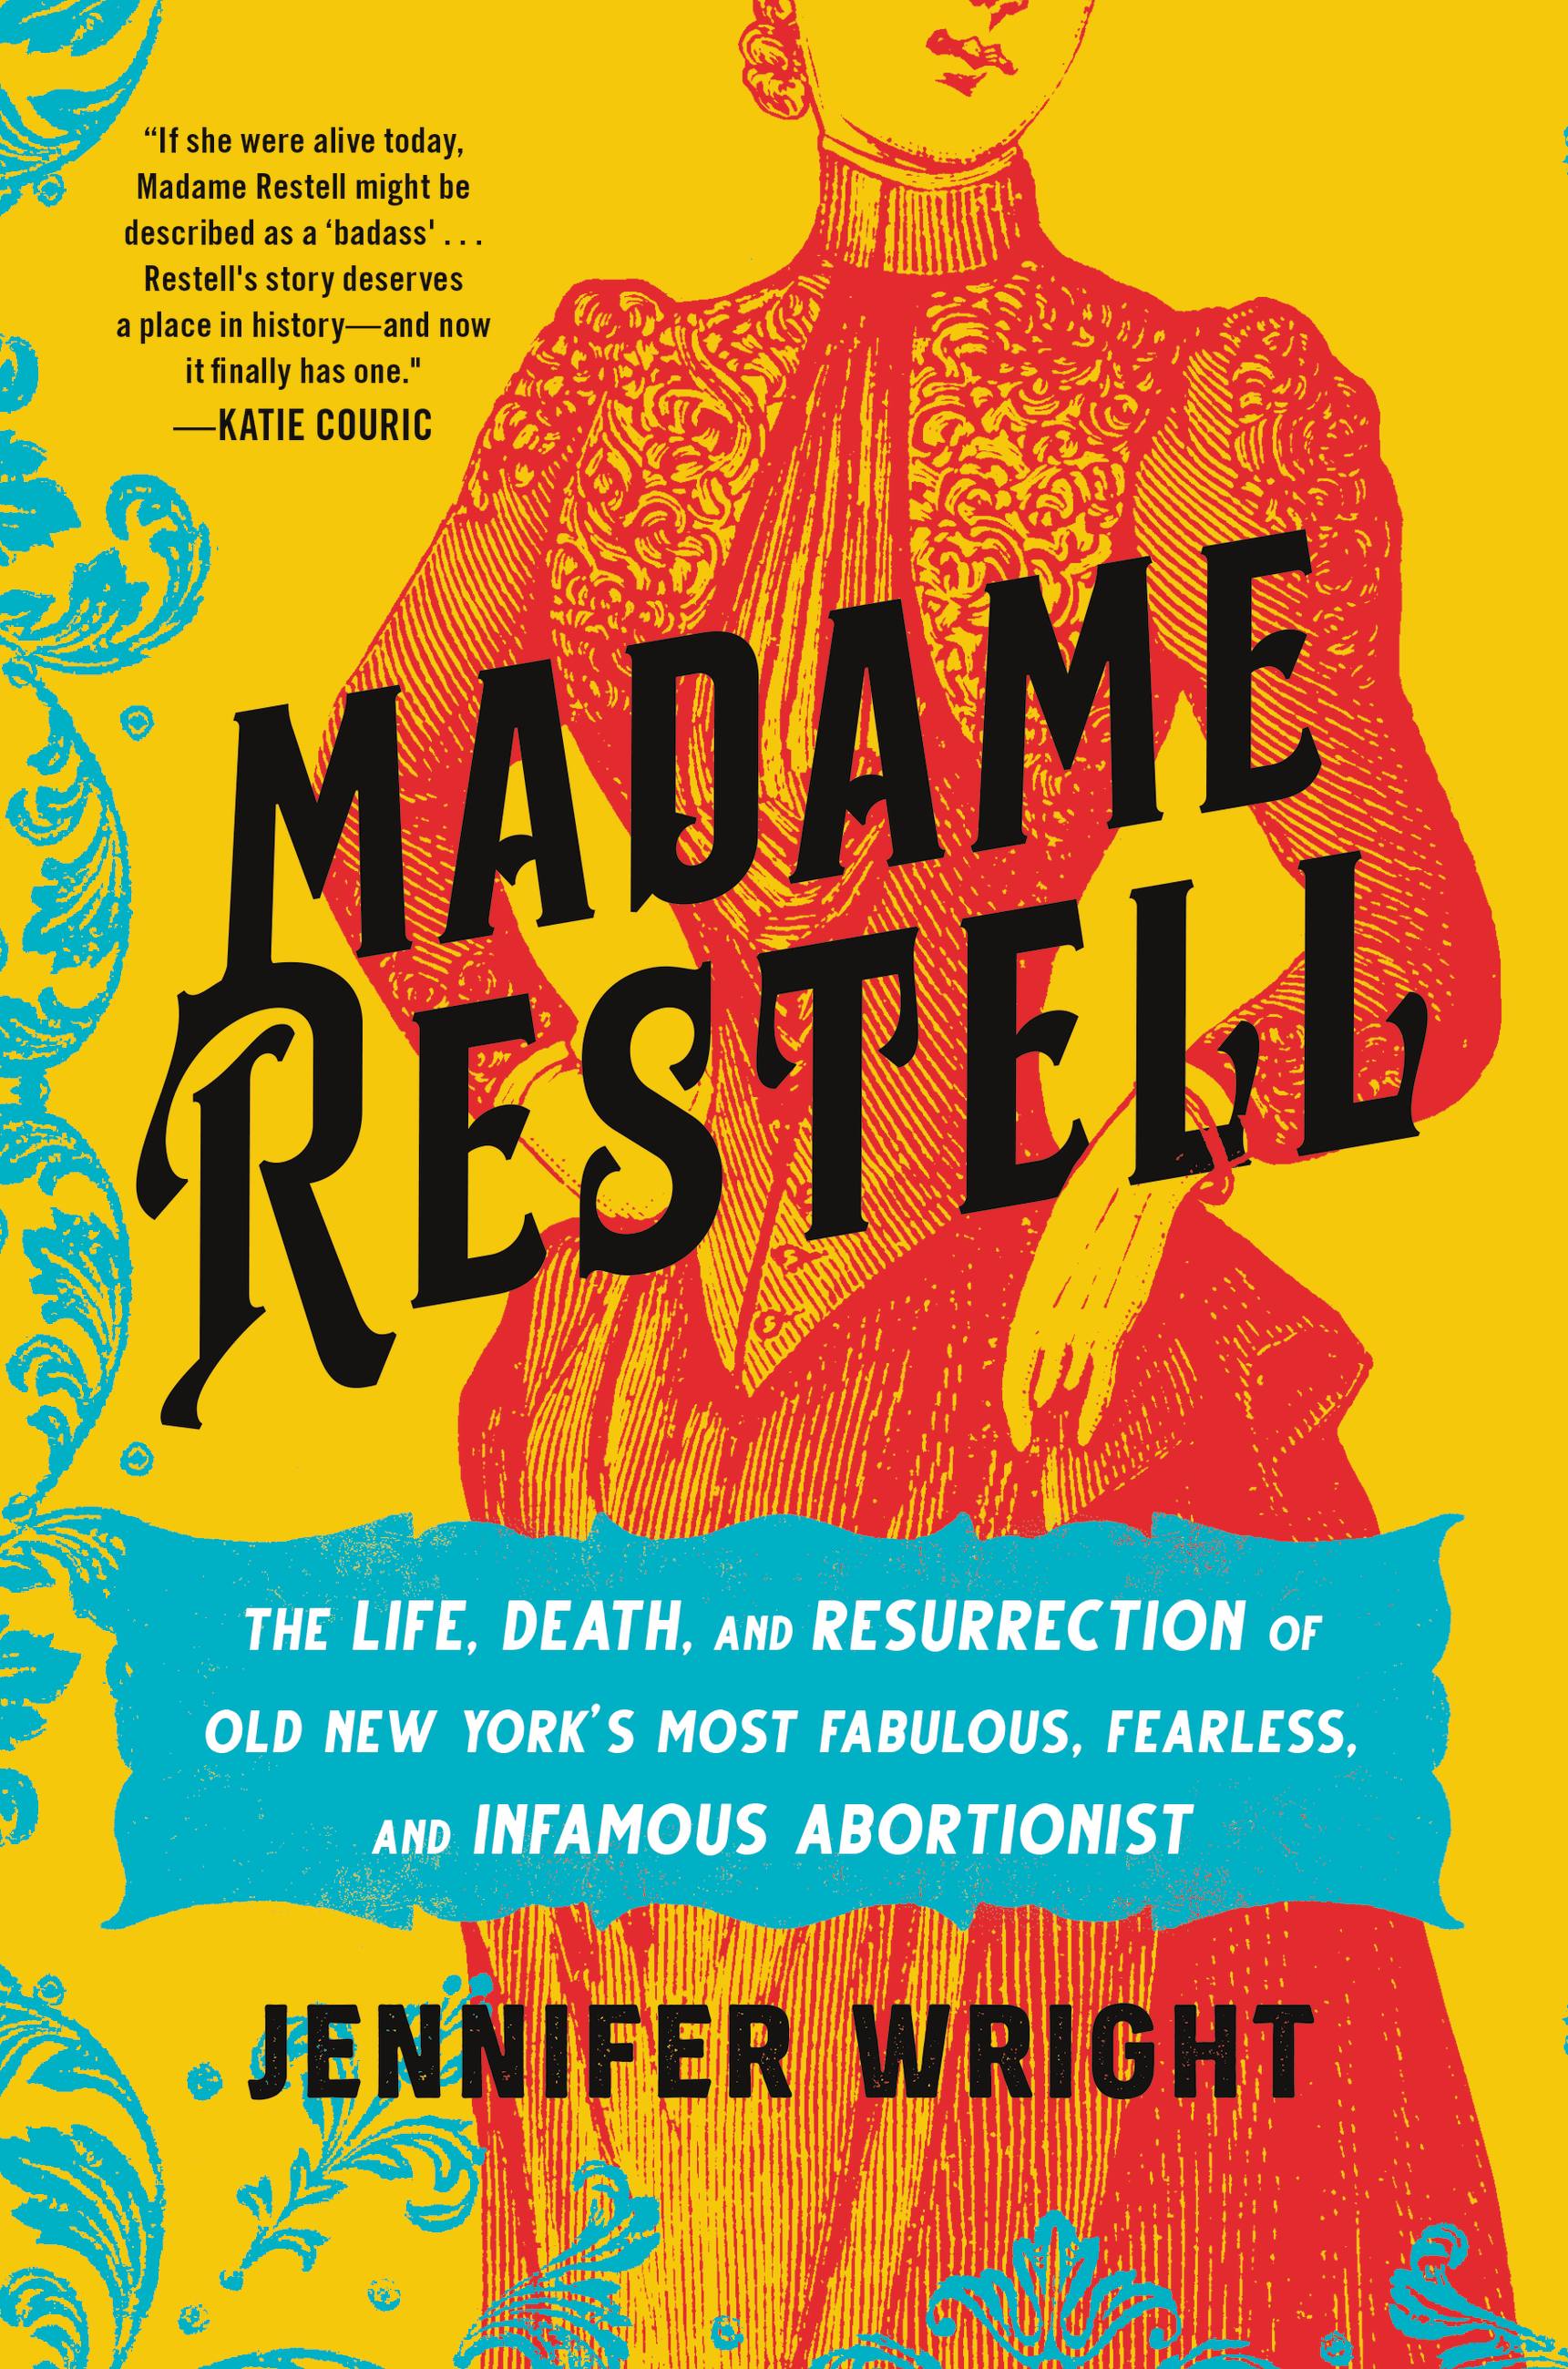 Madame Restell by Jennifer Wright Hachette Book Group